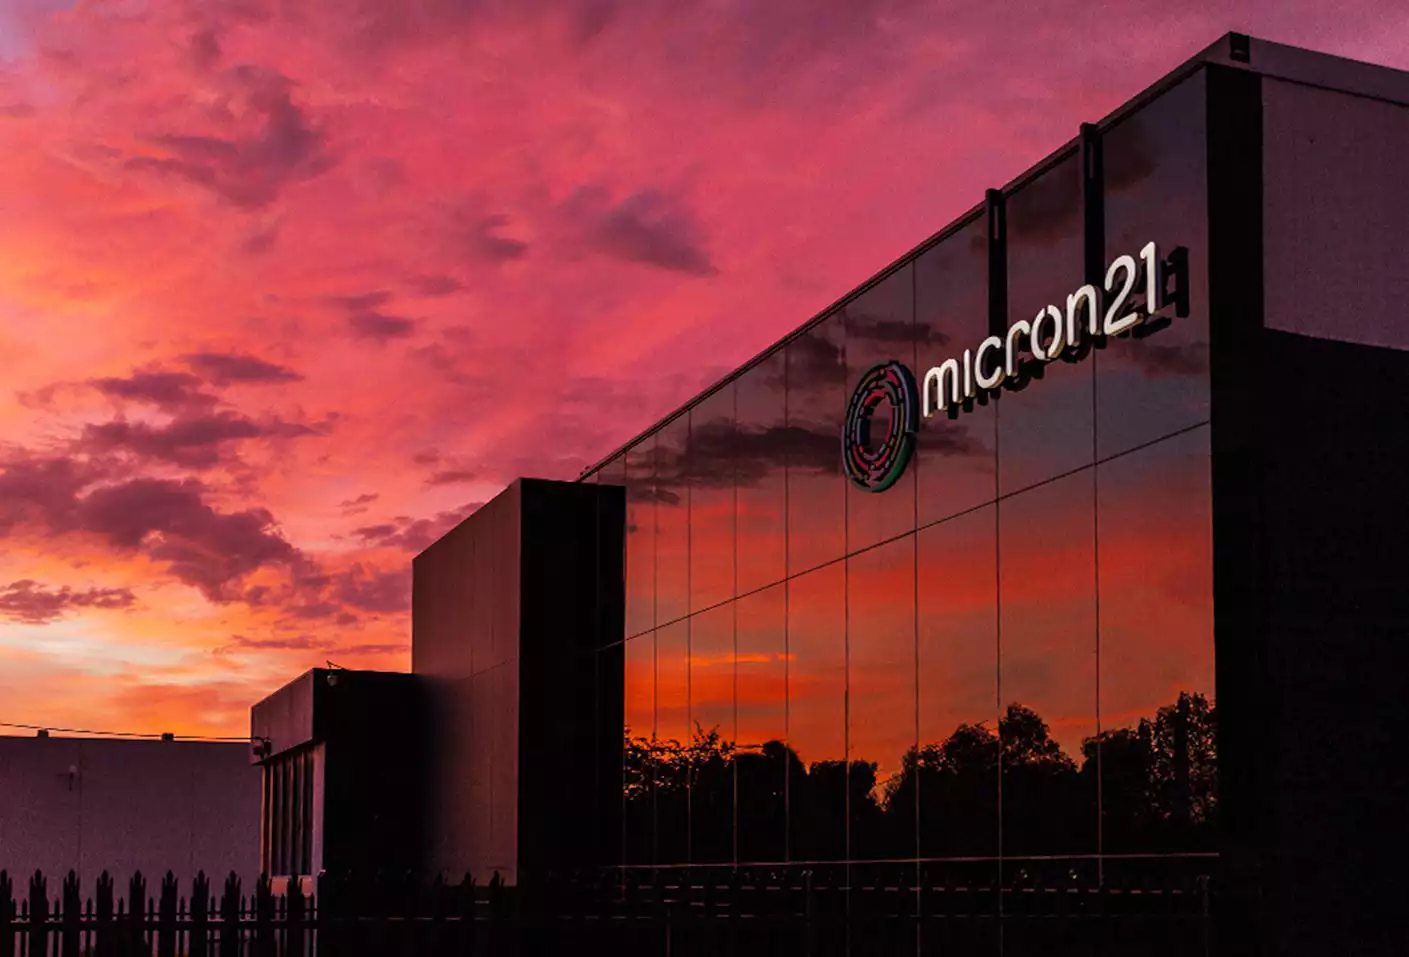 Micron21 supplying premium technology, data centre & cloud hosting solutions